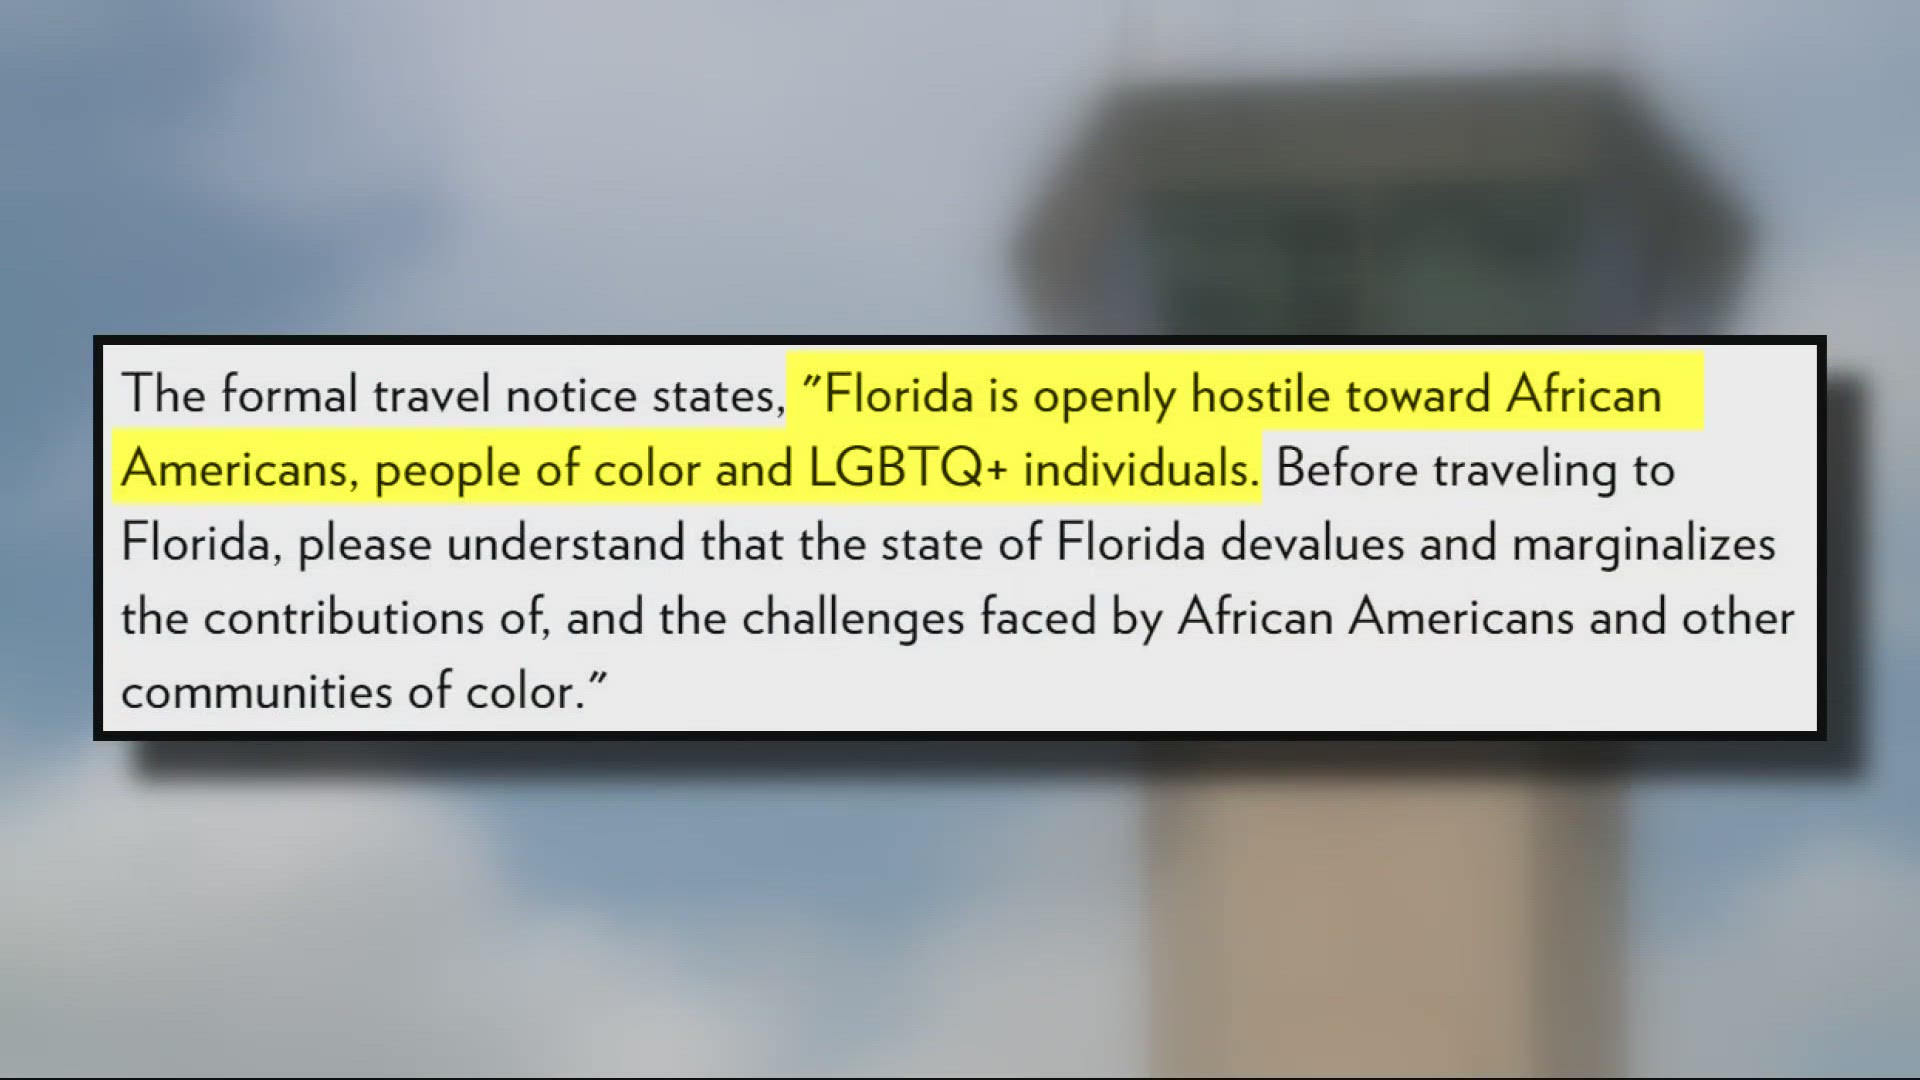 Recently-passed Florida laws have been condemned as "hostile" toward Black, Latino and LGBTQ+ communities.